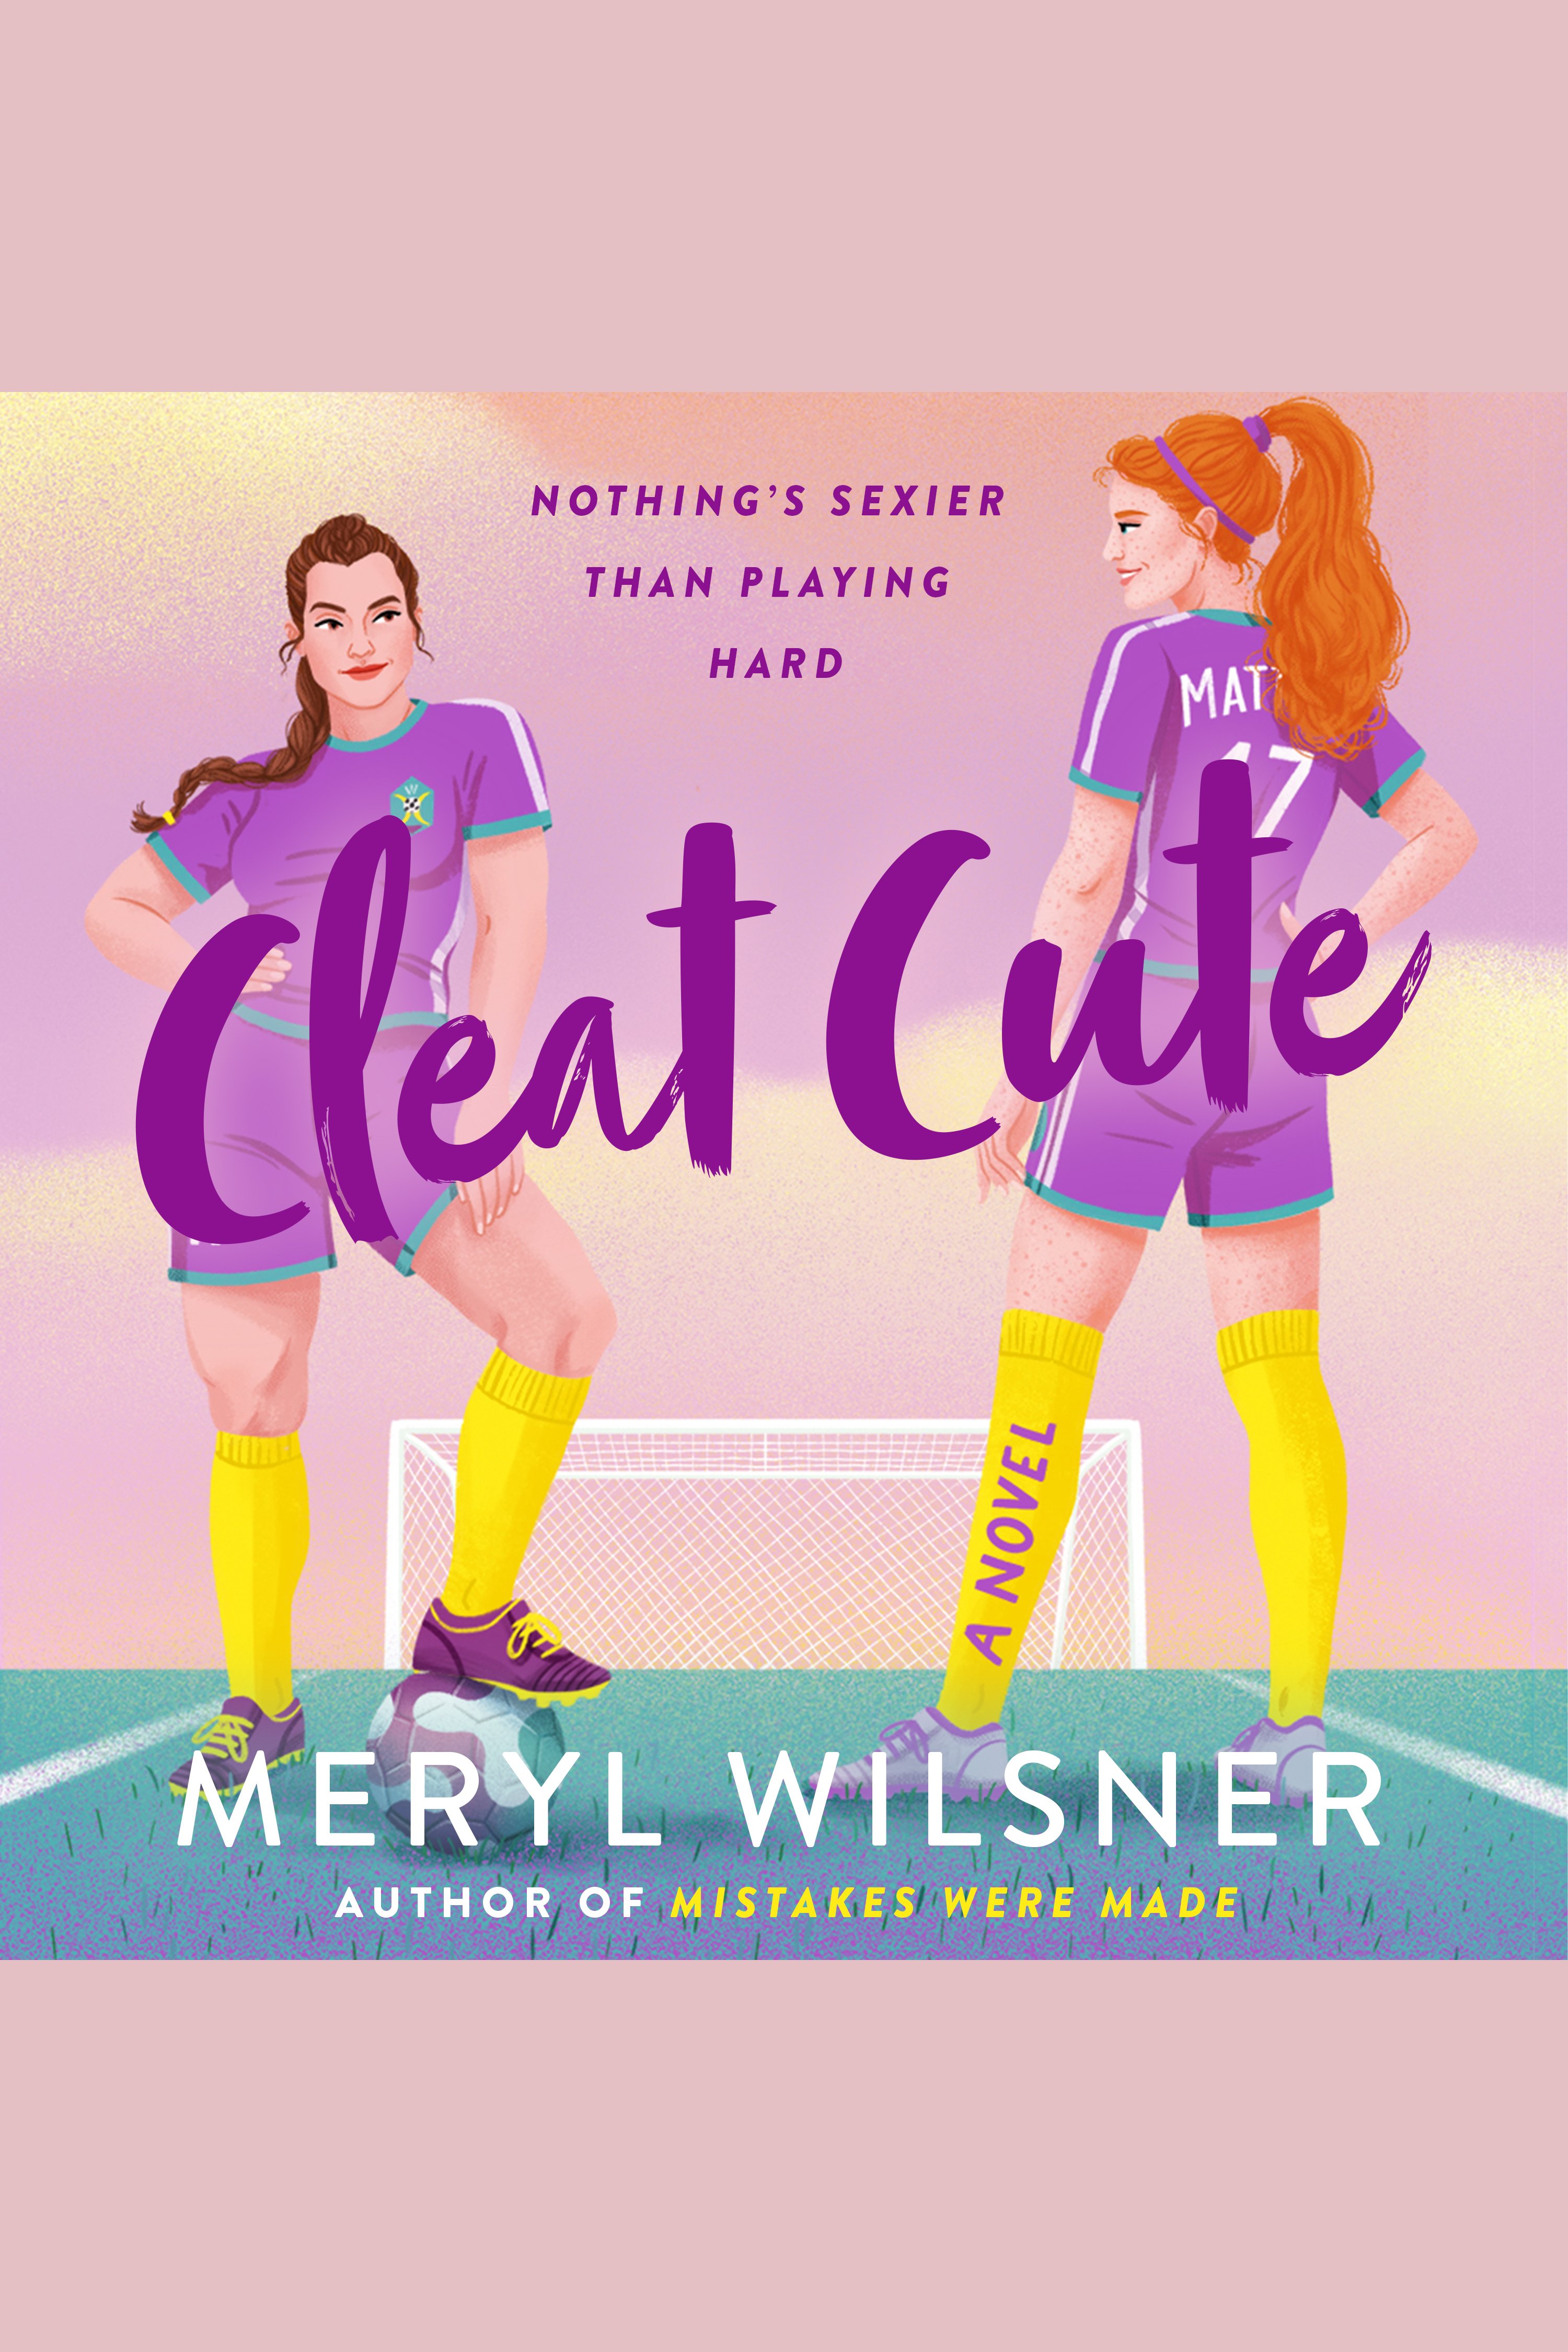 Cleat Cute cover image